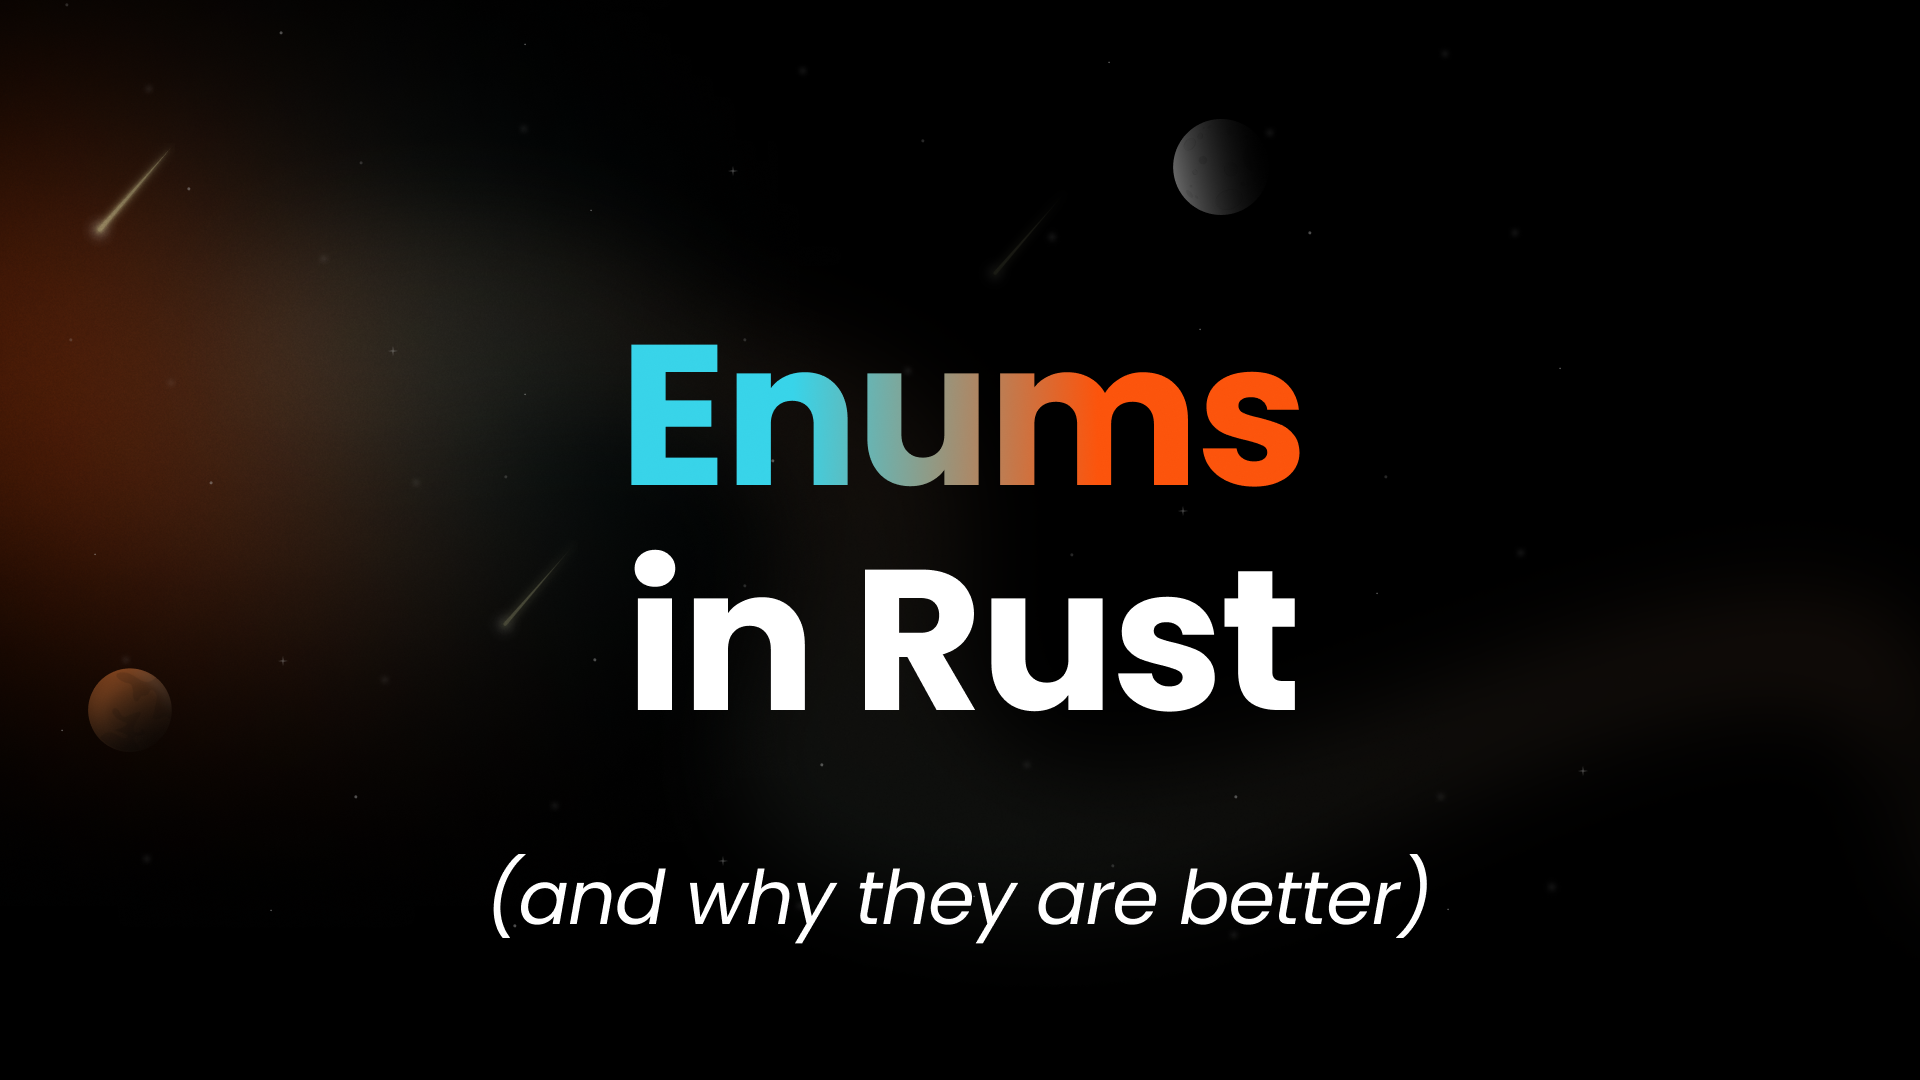 Why Enums in Rust feel so much better